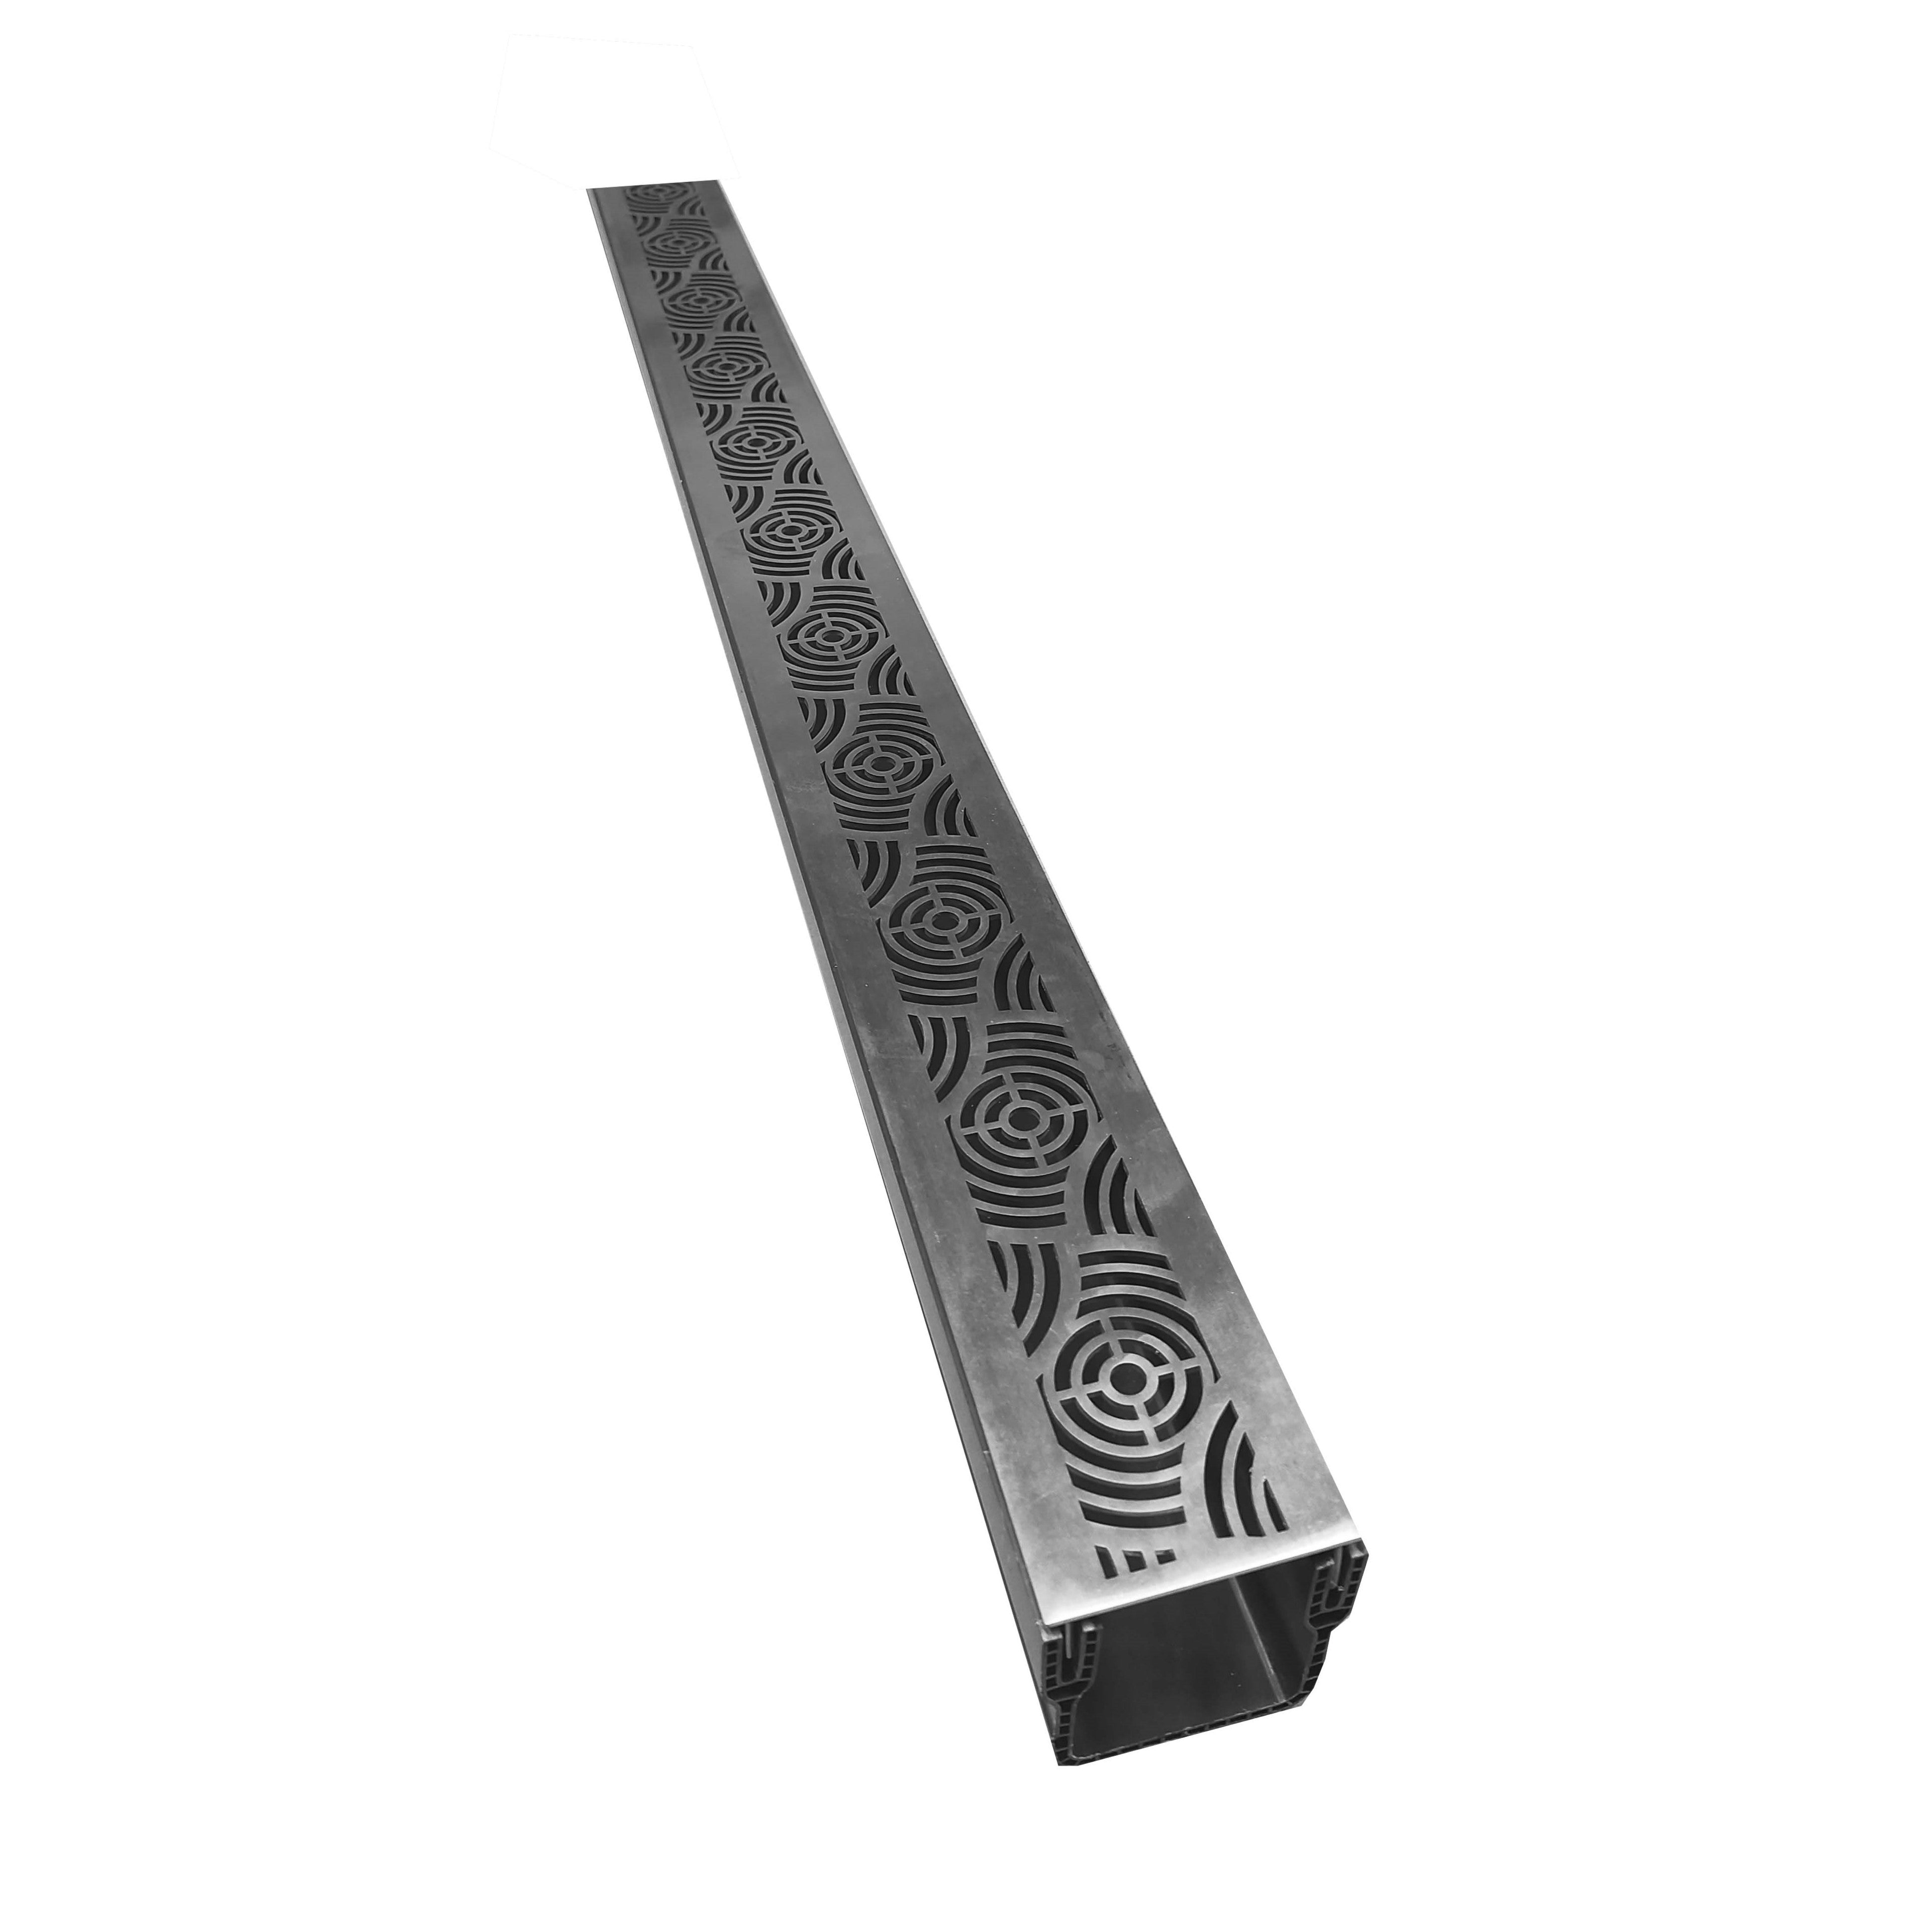 1m Threshold Slim Drain with Waves 316 Stainless Steel Grating (65 x 60mm Shallow)